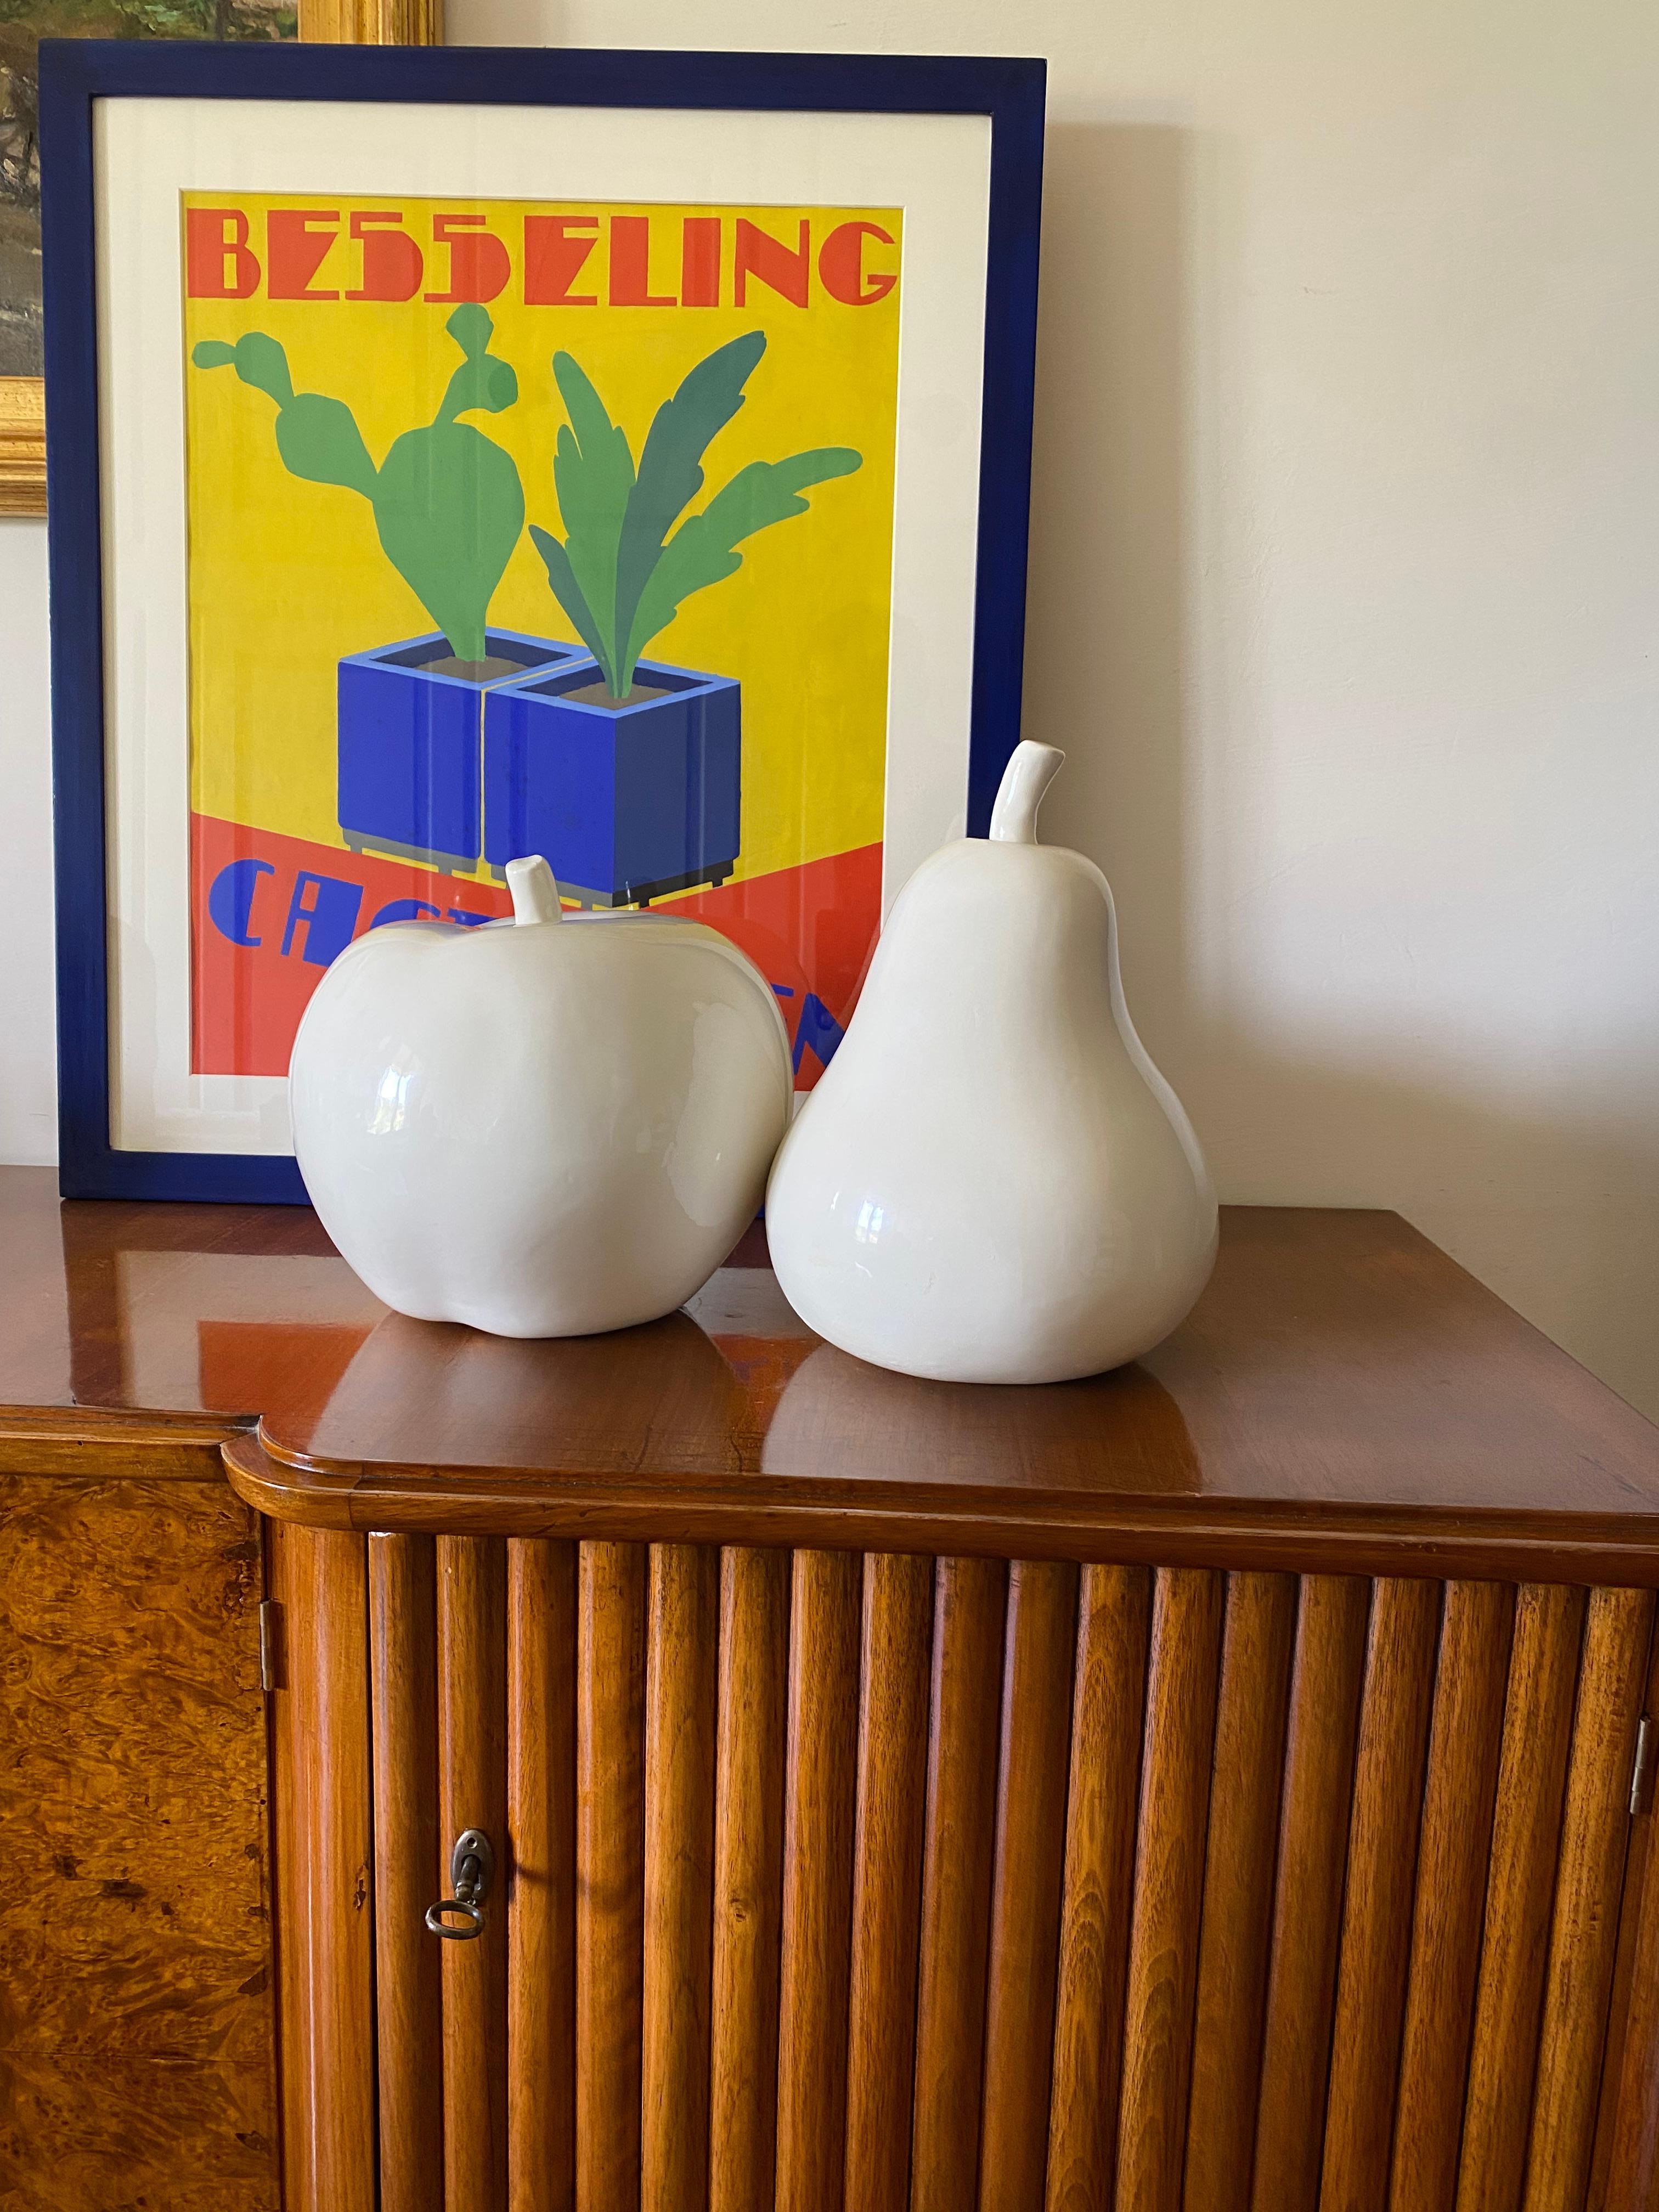 White ceramic Apple and Pear sculptures

Italy ca. 1980

ceramic

Apple: H 26.5 cm - Diam. 26.5 cm

Pear: H 31.5 cm - Diam. 21 cm

Conditions: excellent no defects